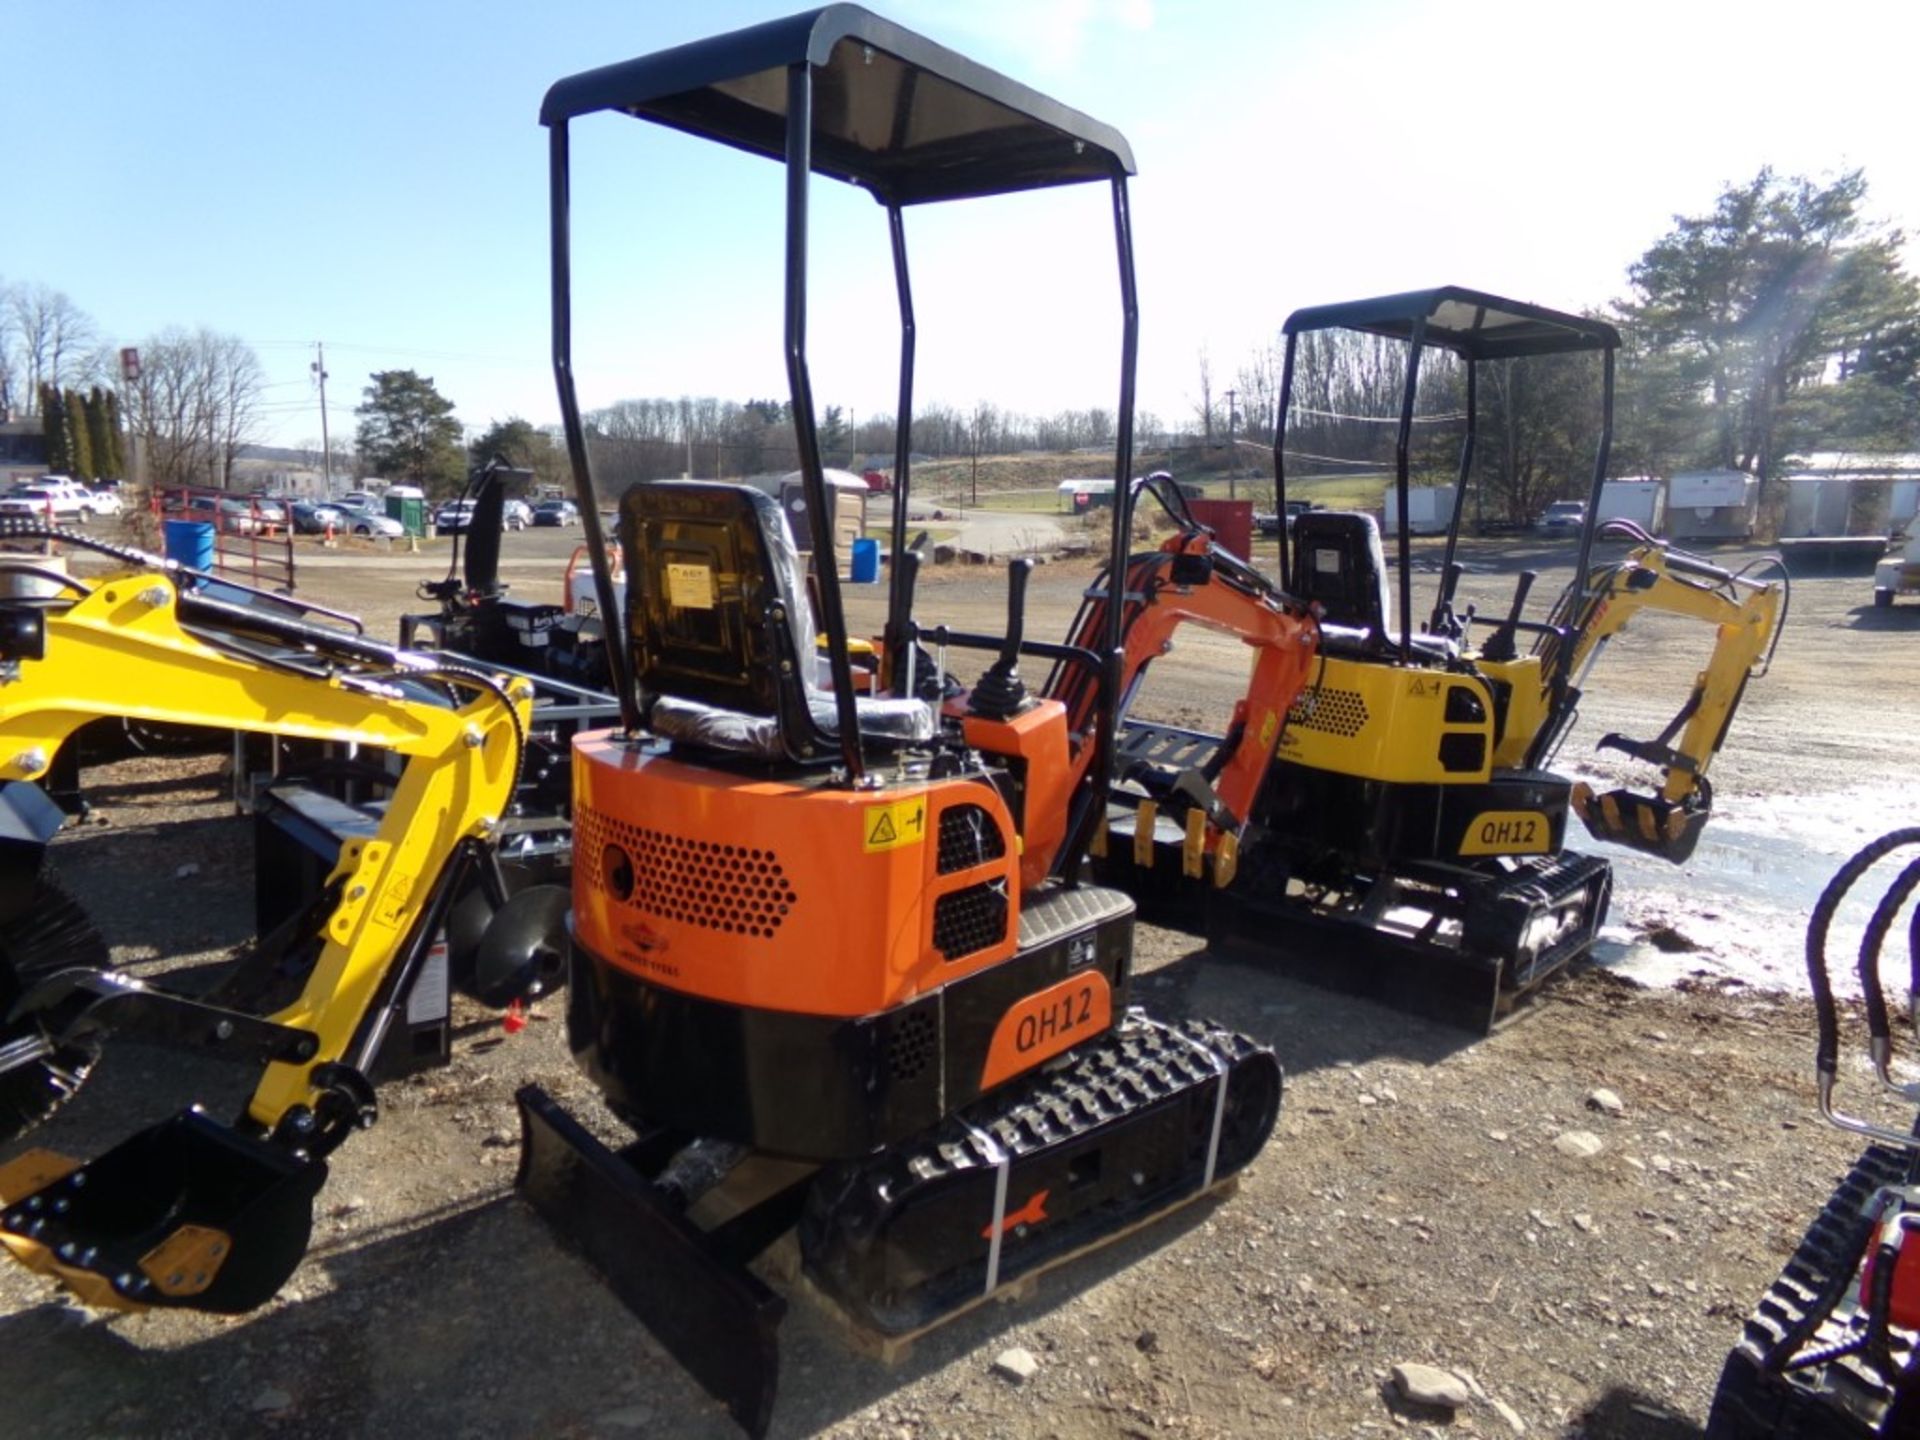 New Orange AGT Industrial QH12 Mini Excavator, Gas Engine,Grader Blade and Stationary Thumb